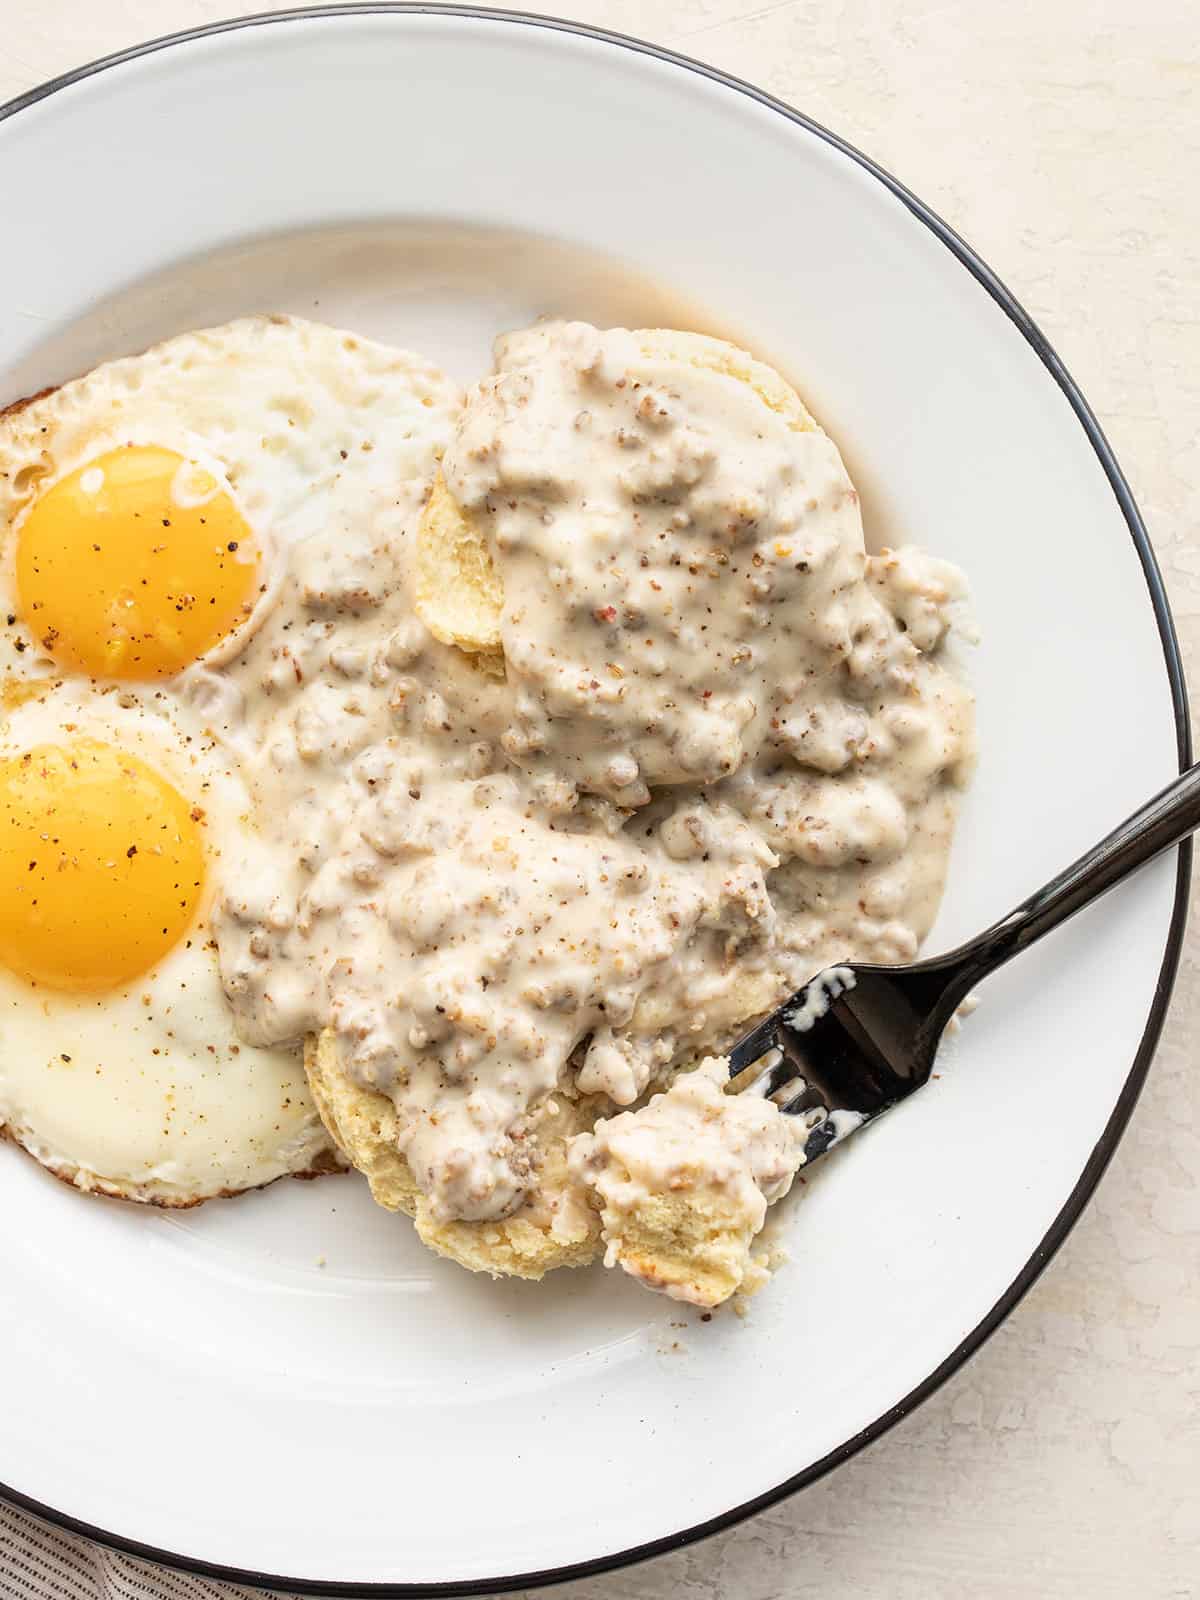 Biscuits and gravy on a plate with eggs, a fork taking a bite